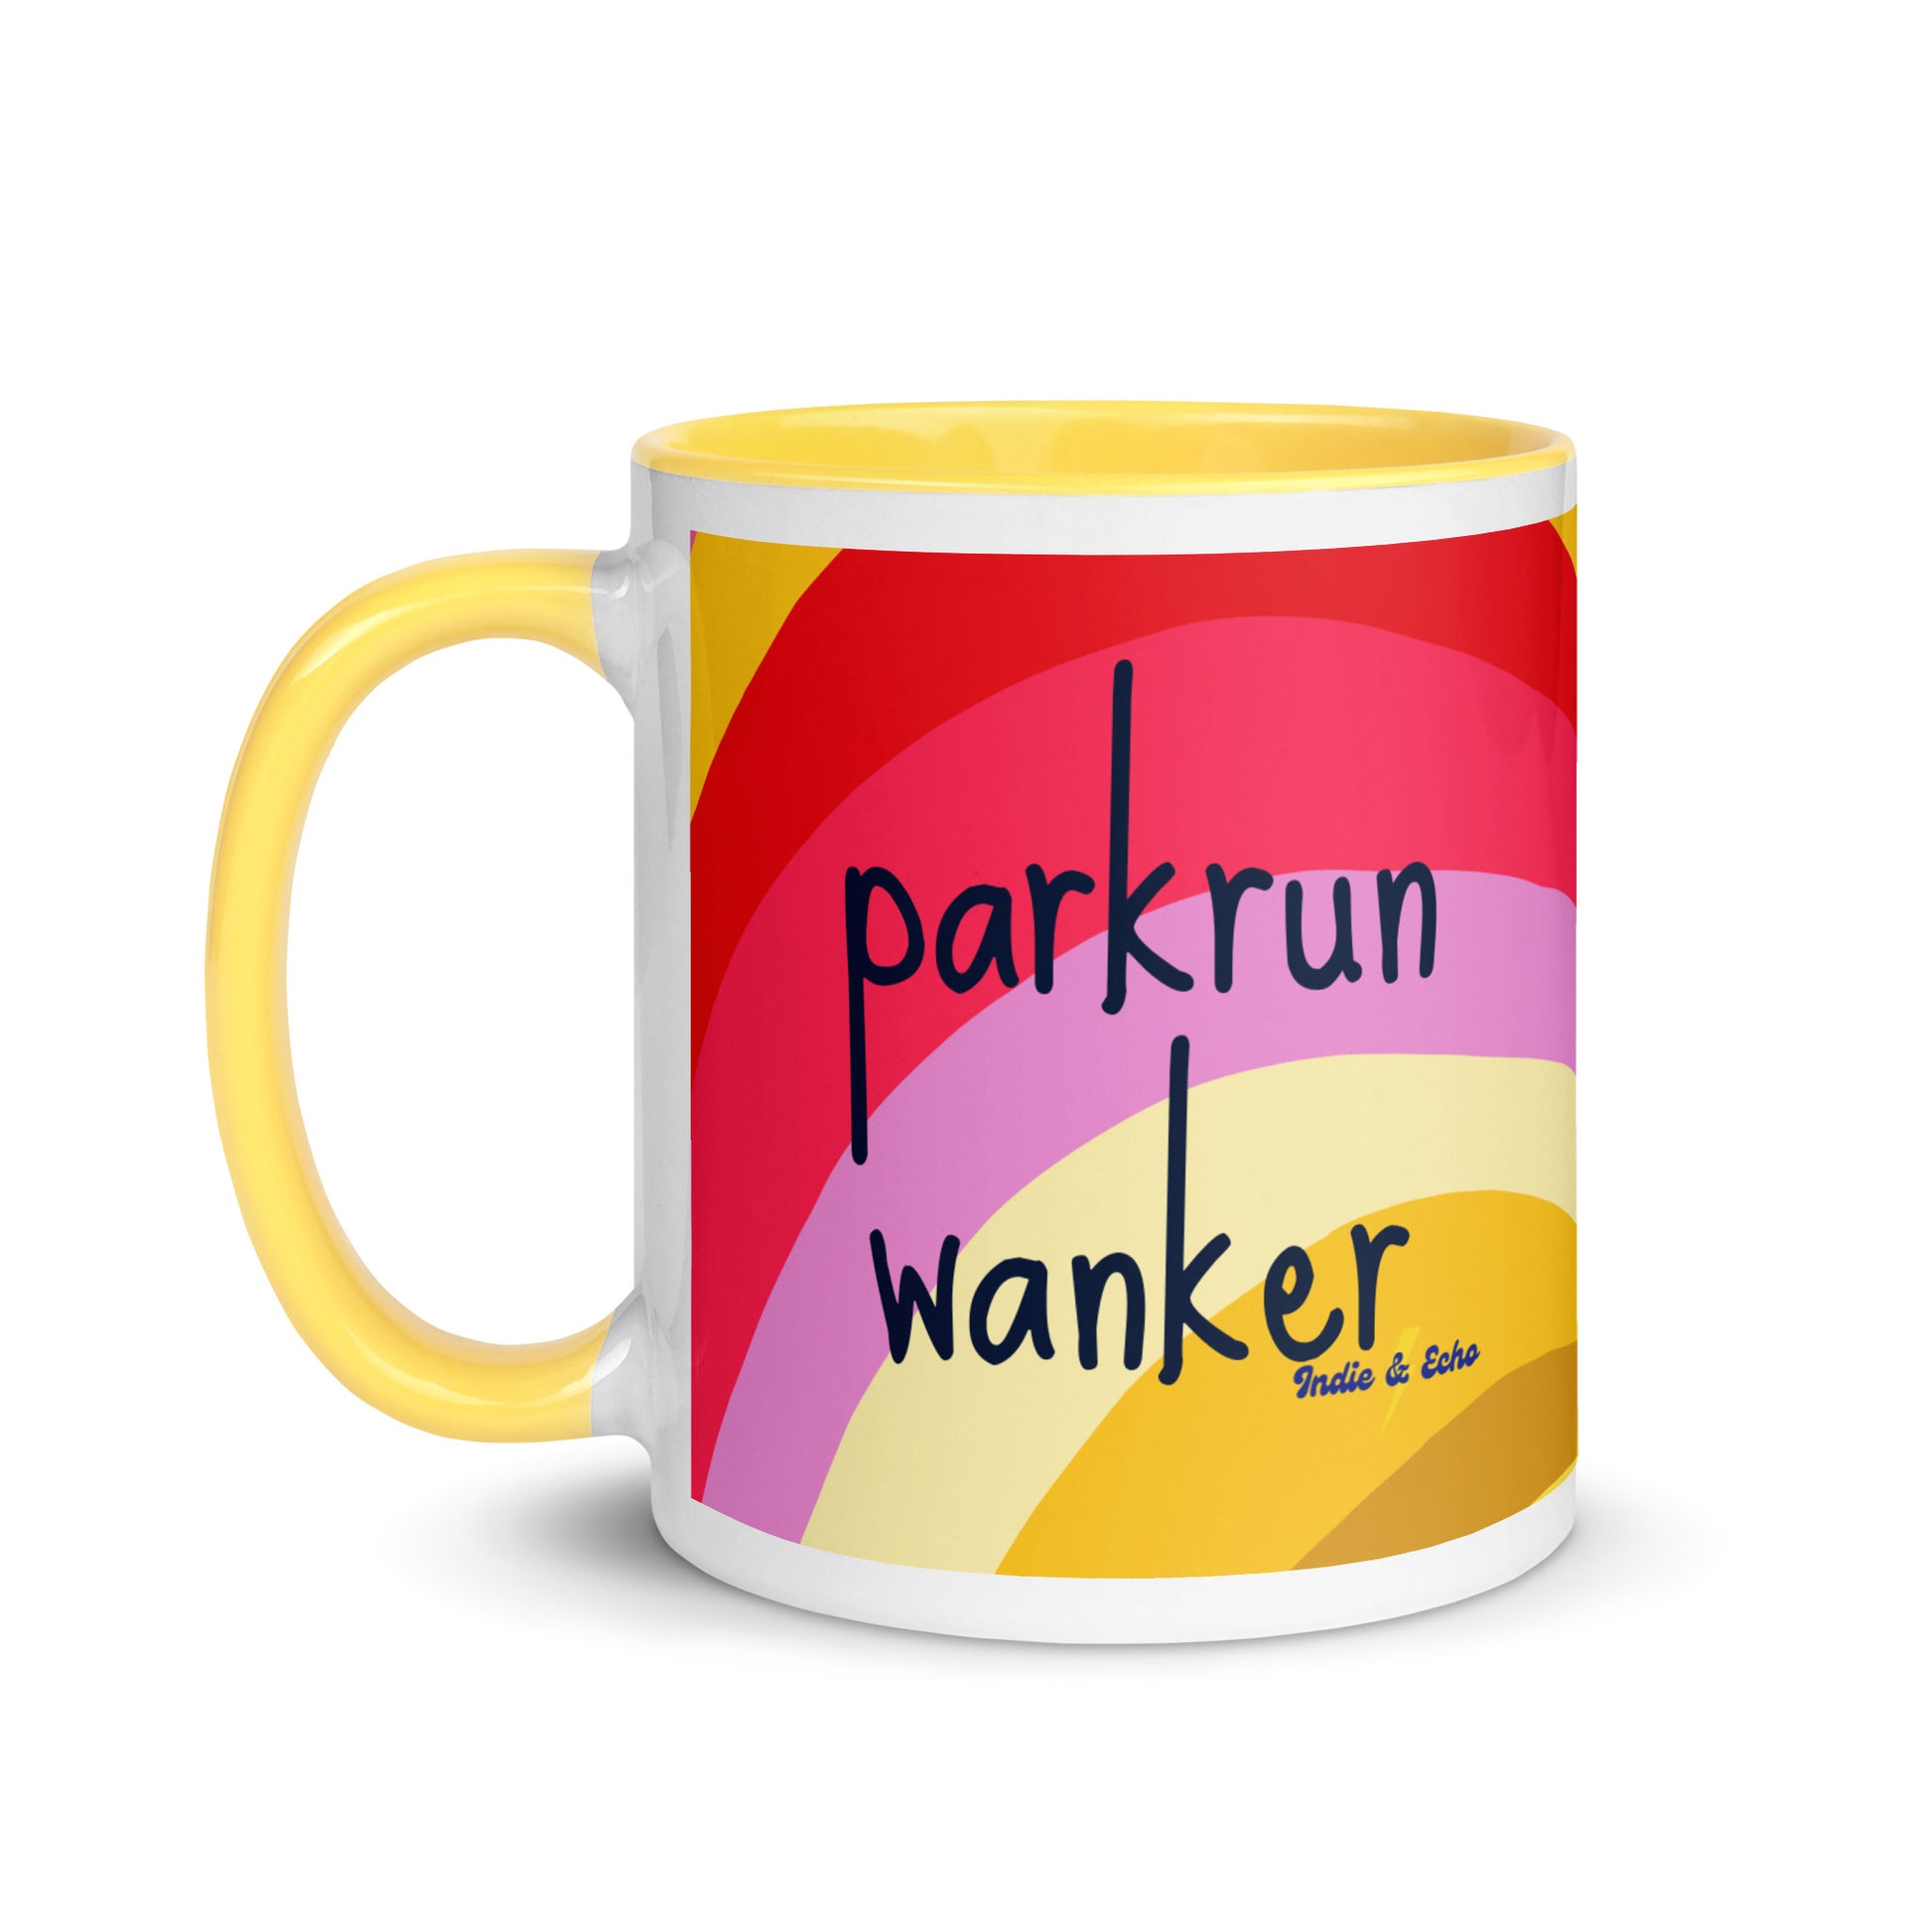 mug with a yellow rim and handle, with a colourful rainbow design and the words parkrun wanker across the front